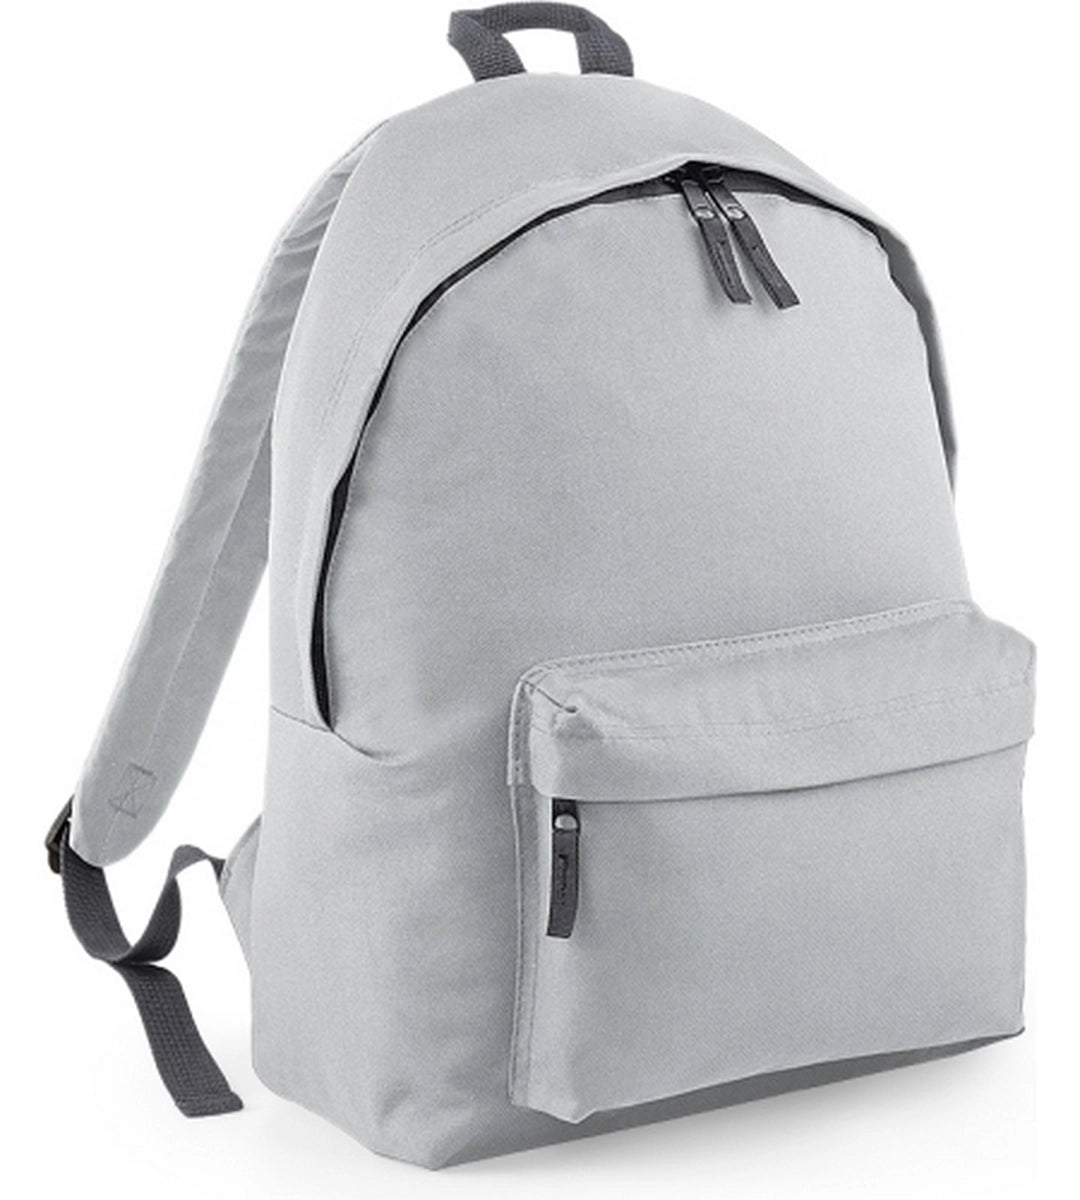 Original Fashion Backpack-LGRY/GRPH1S